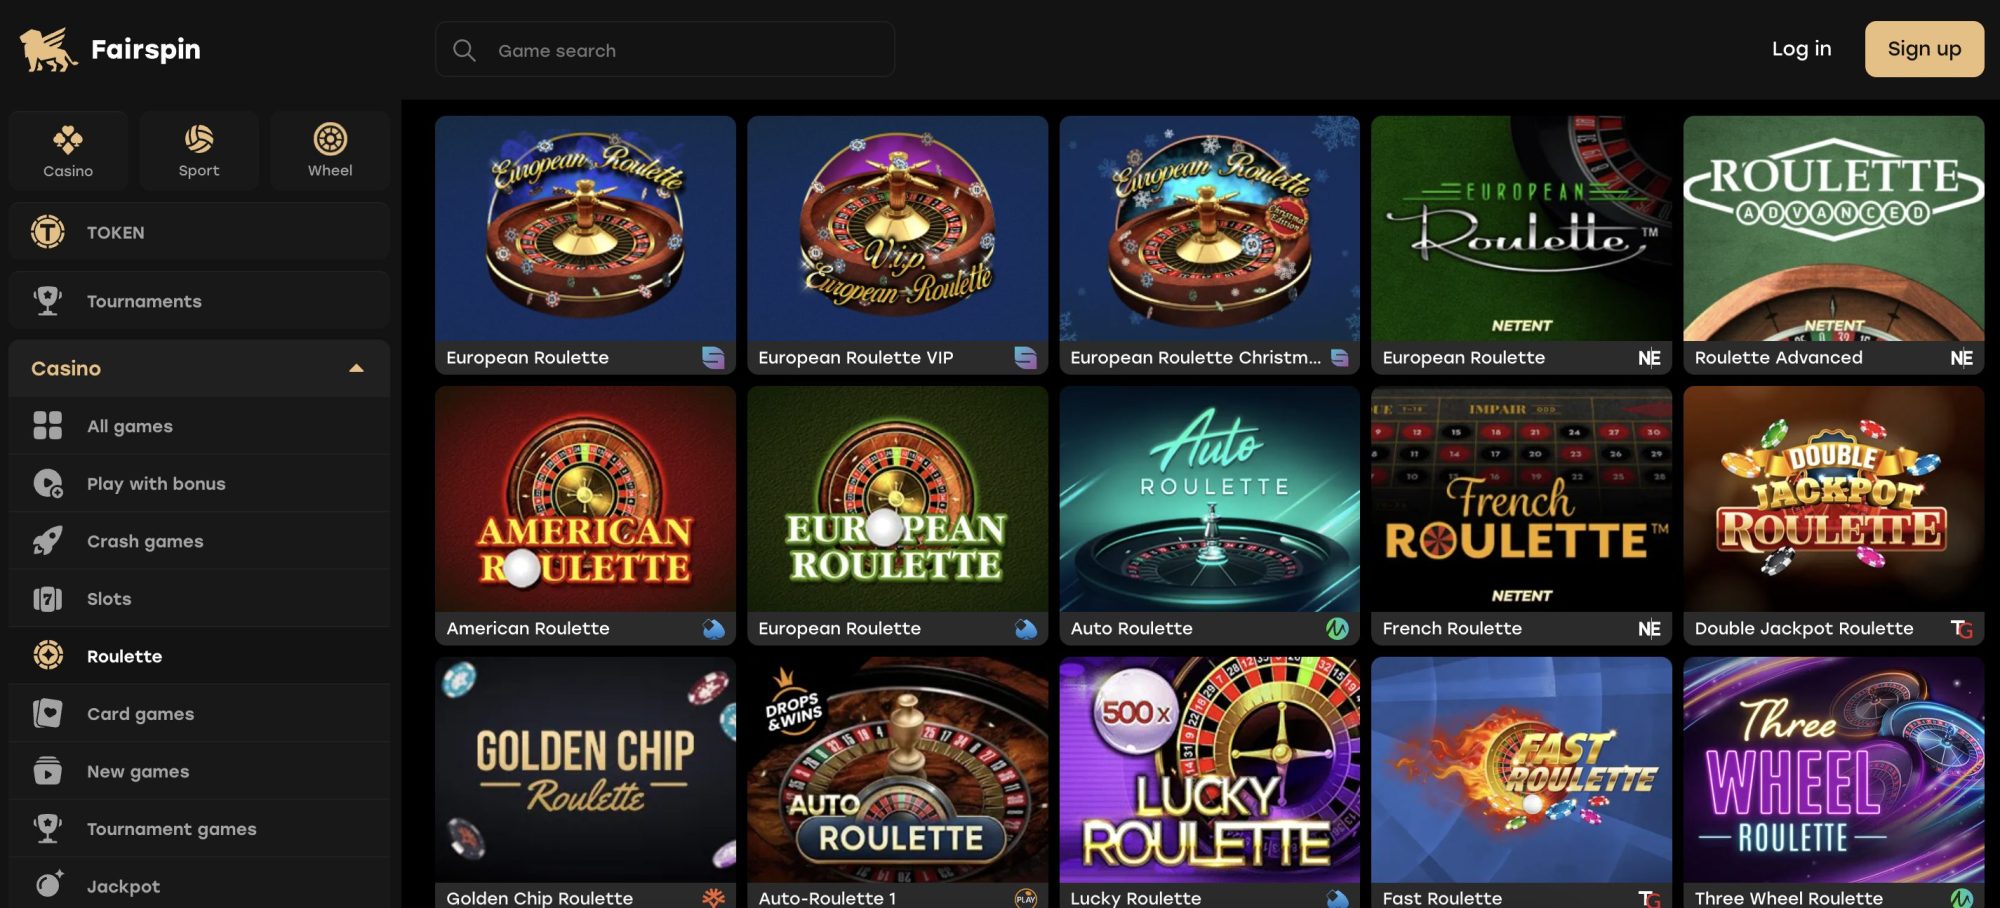 Fairspin casino review